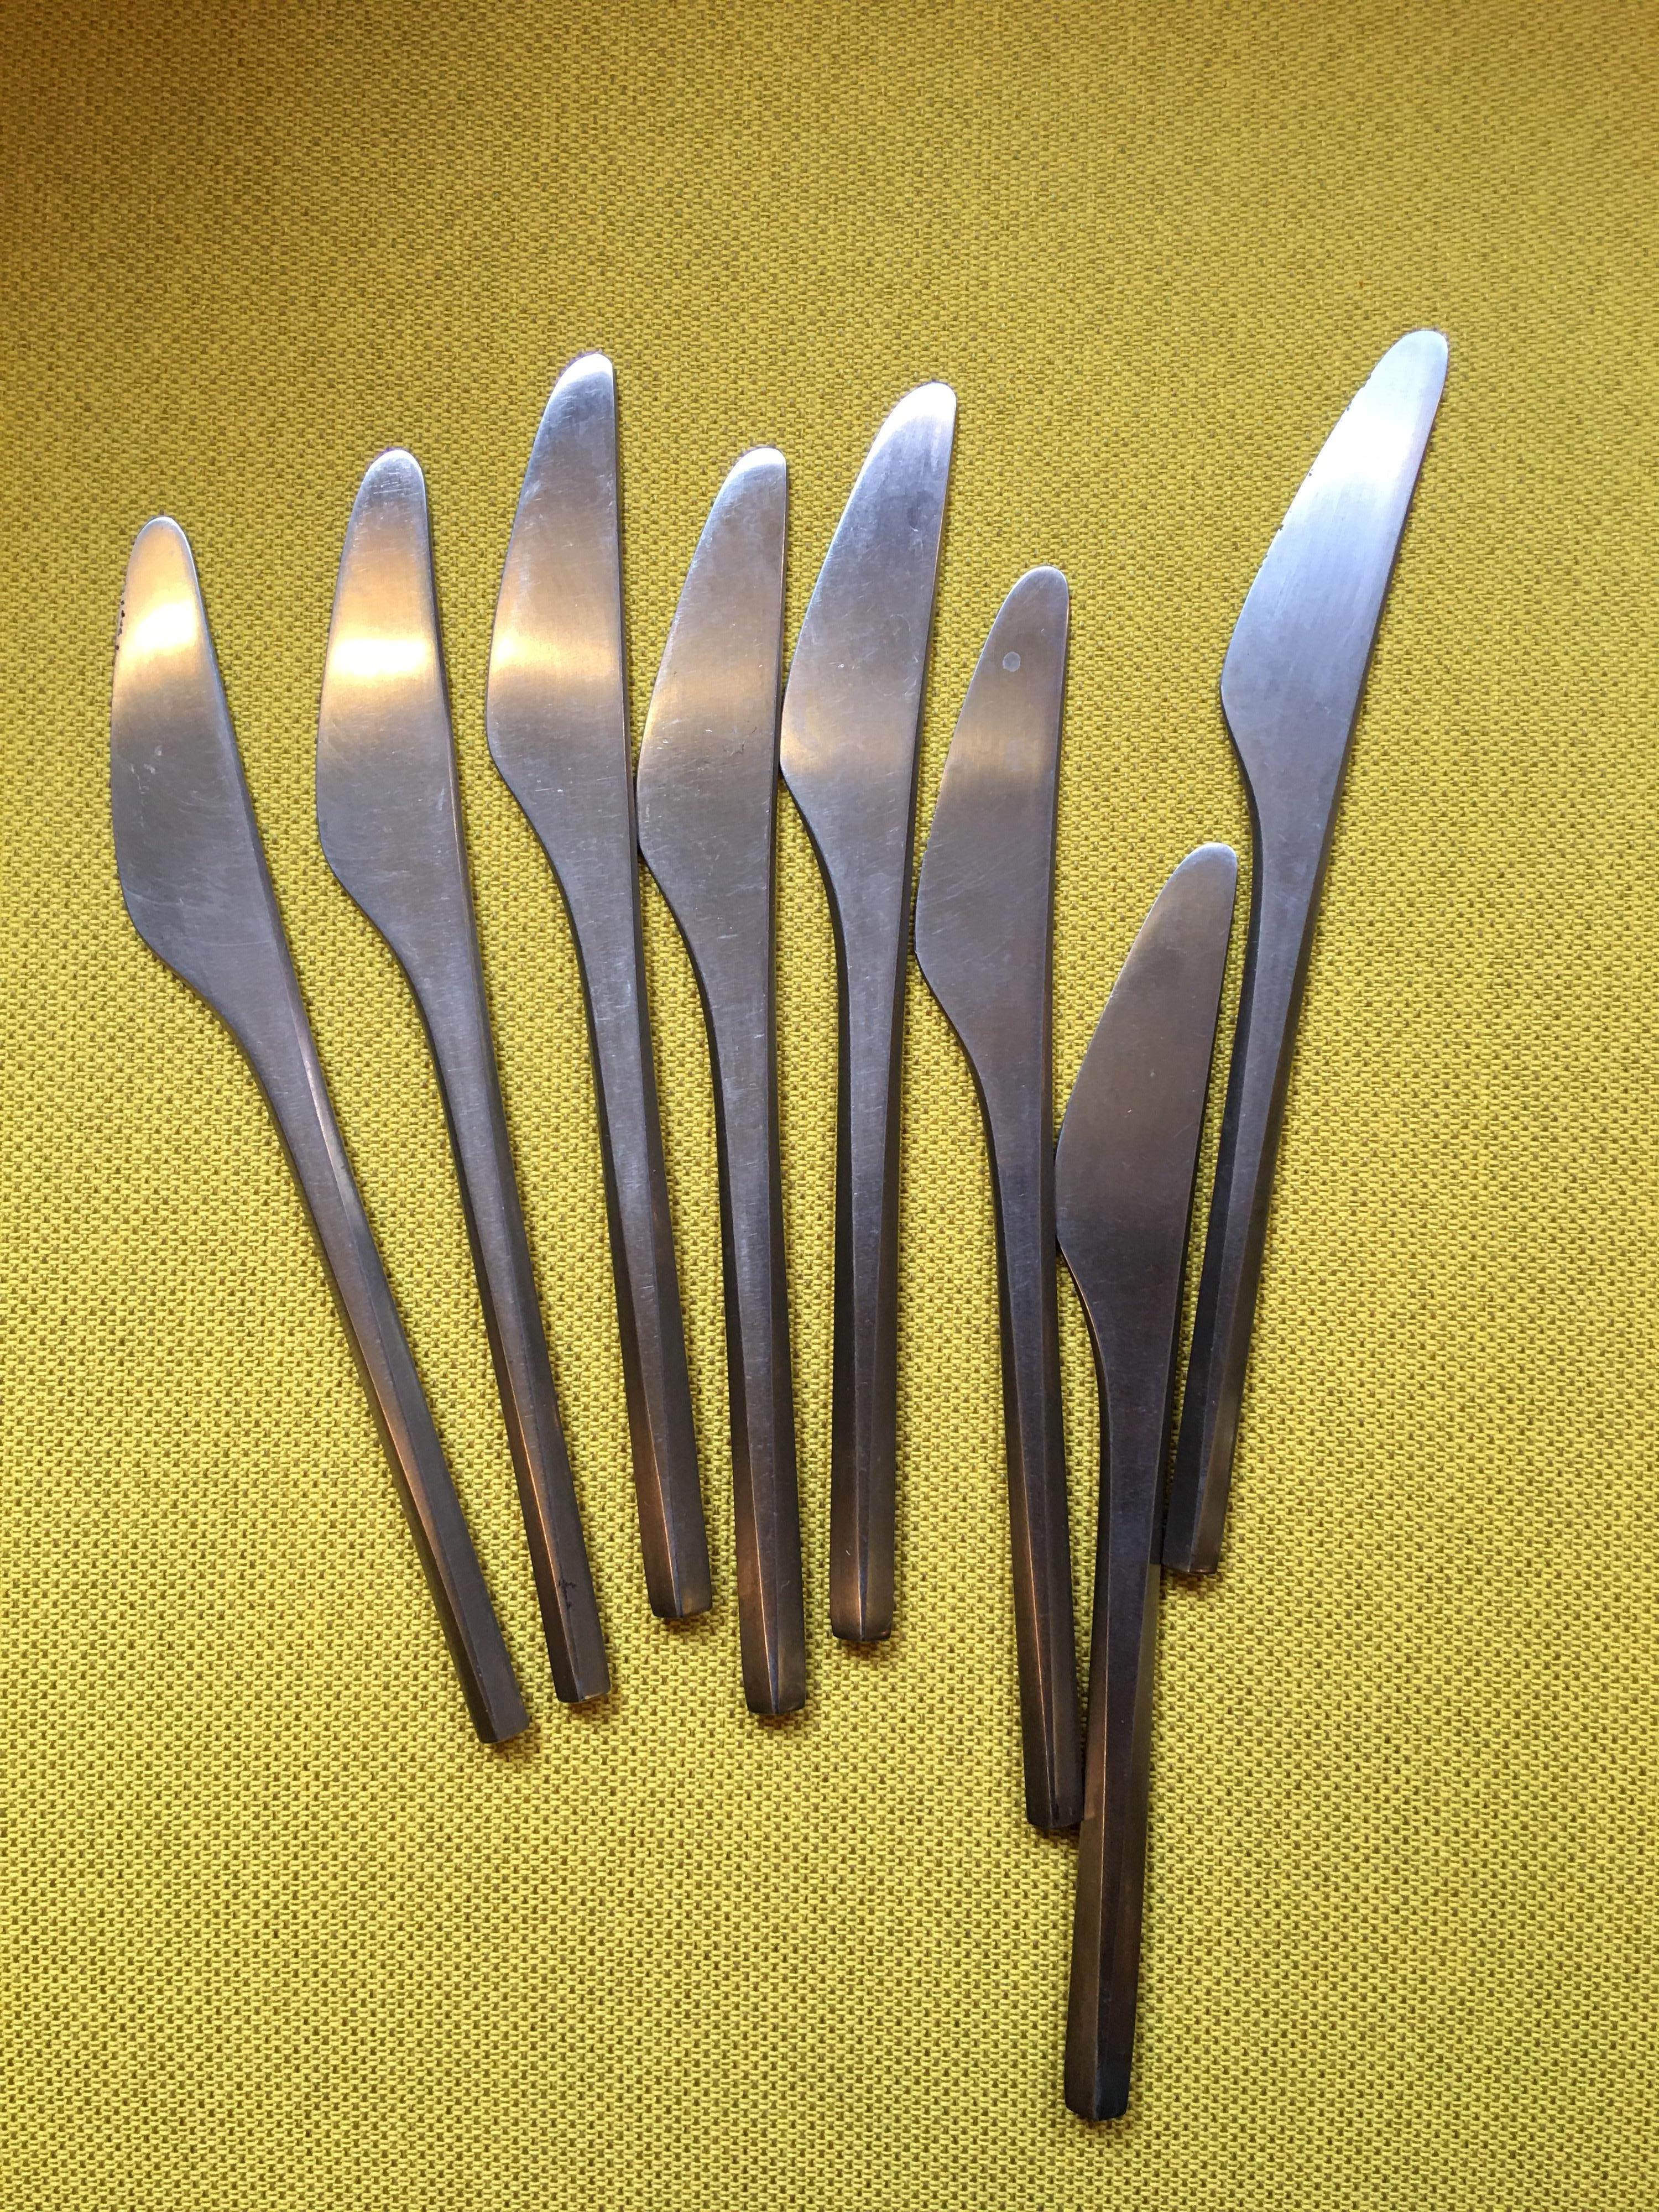 Georg Jensen Prism Stainless Flatware Service for 8 1